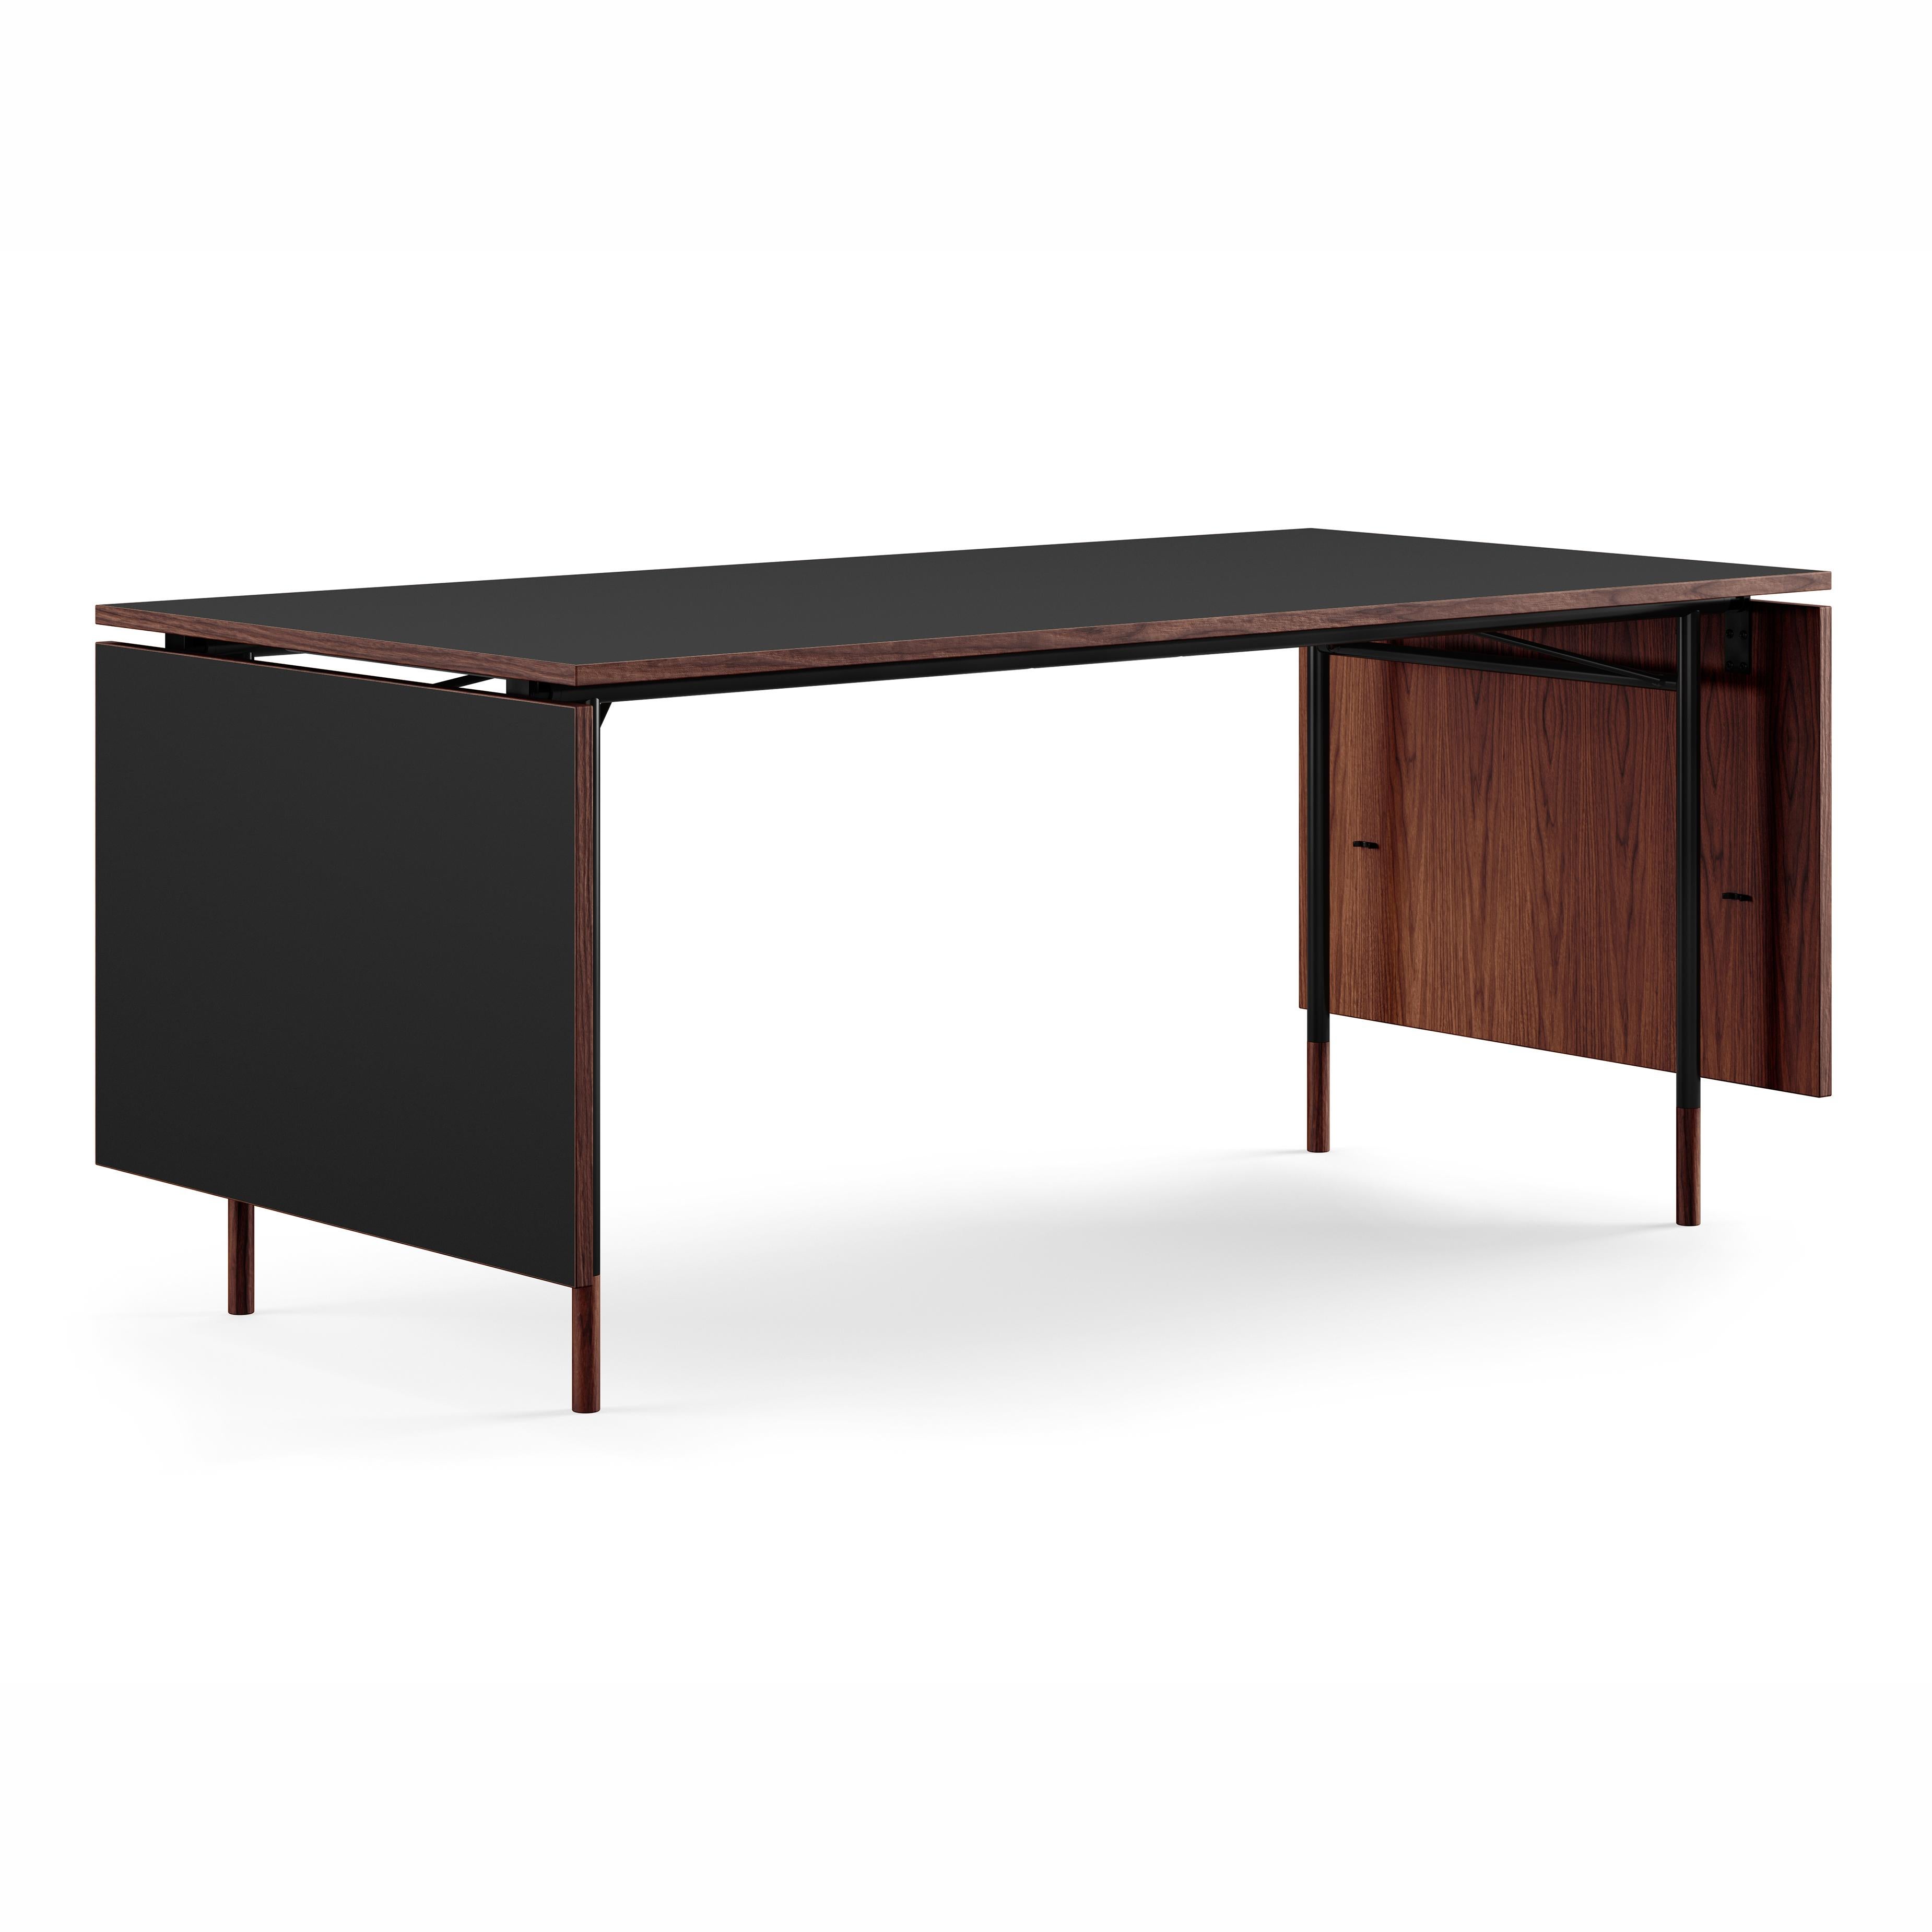 Modern Finn Juhl Nyhavn Dining Table with Two Drop Leaves, Lino and Wood